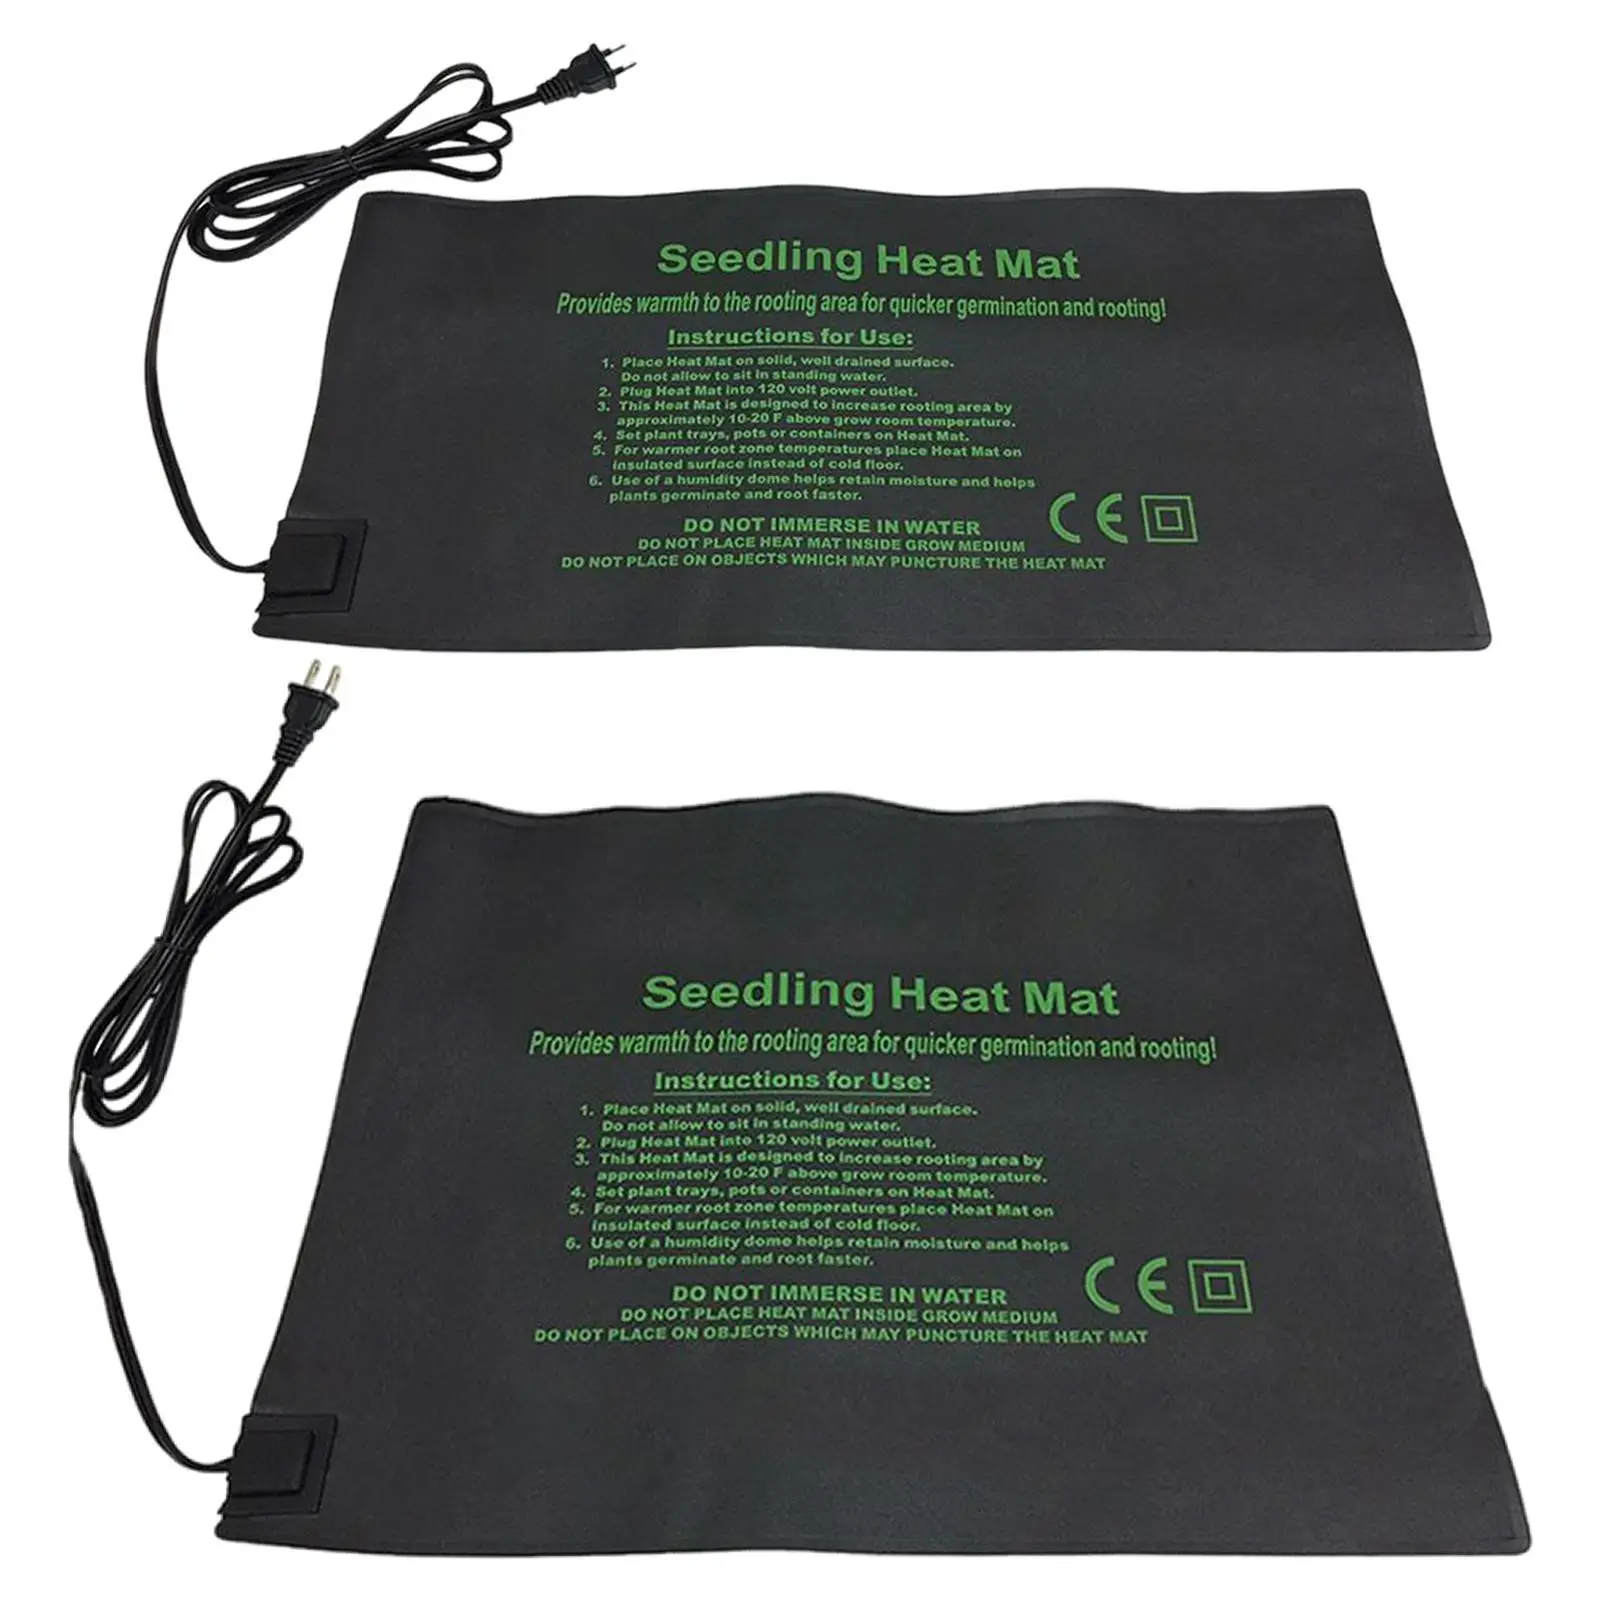 Durable Seedling Heat Mat Seed Warming Heat Pad Seedling Germination Propagation Hydroponic Heating Pad for Seed